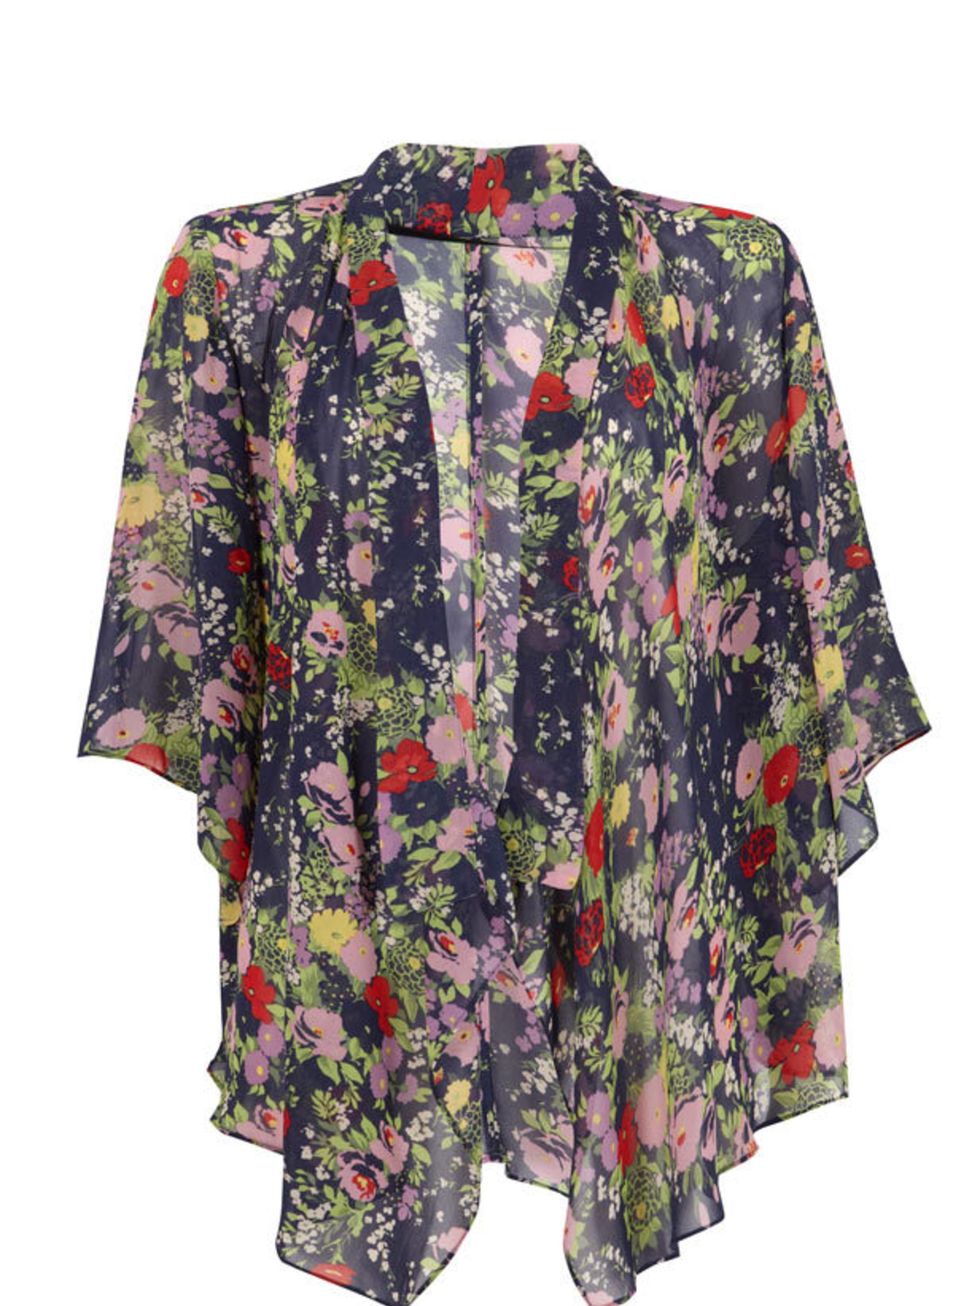 <p>In support of the Teenage Cancer Trust, Topshop has created three rather gorgeous printed kimonos. Worn over a maxi, plain Tee or a bikini, these uber feminine pieces are simply gorgeous, multi-purpose and timeless to boot <a href="http://www.topshop.